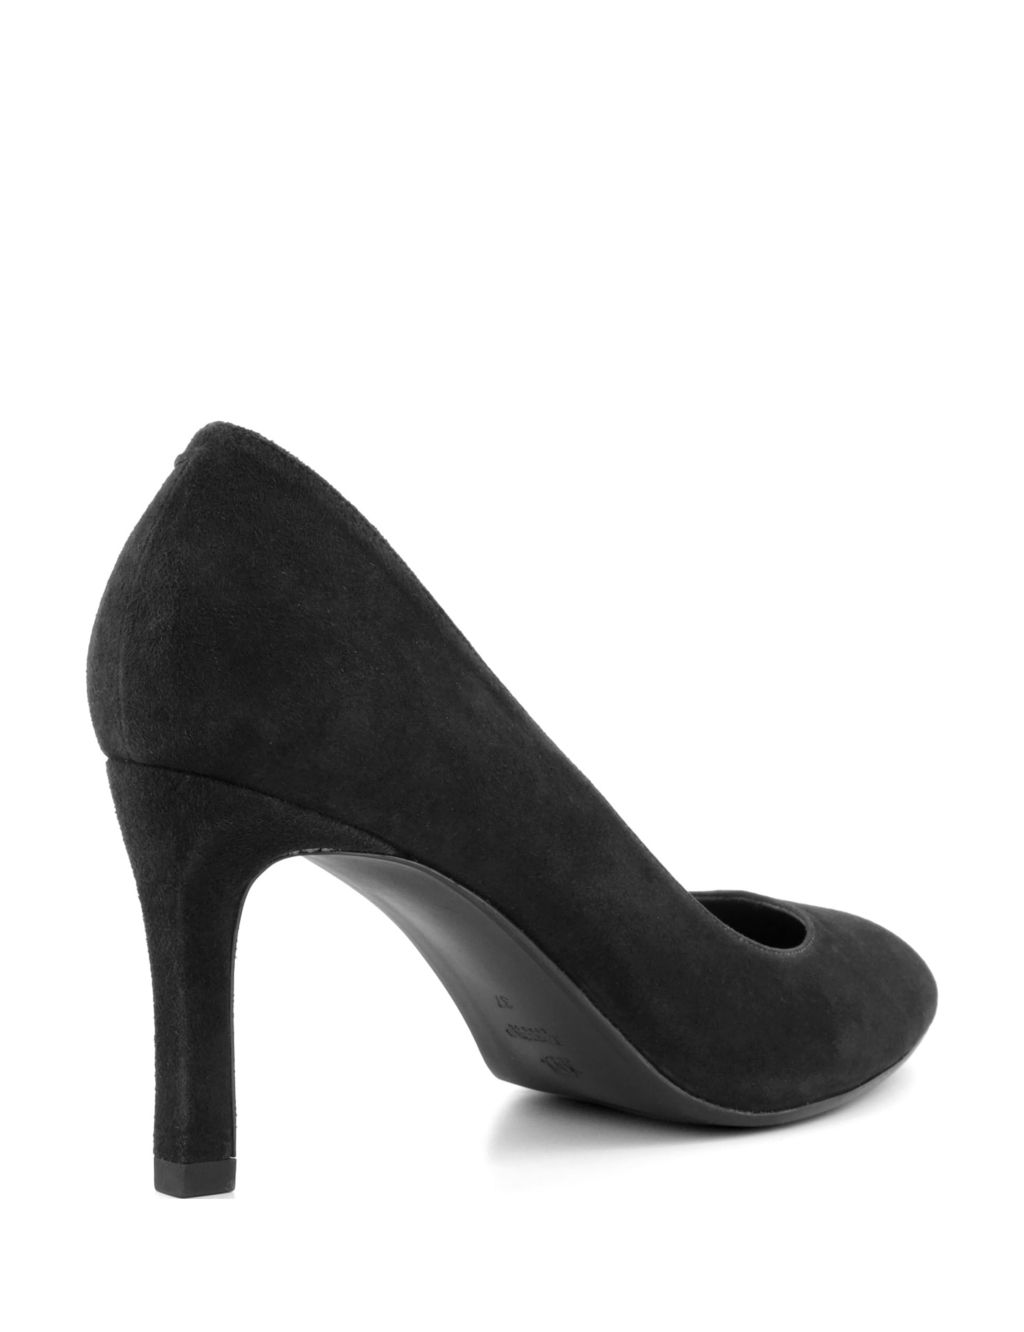 Leather Stiletto Heel Court Shoes image 5